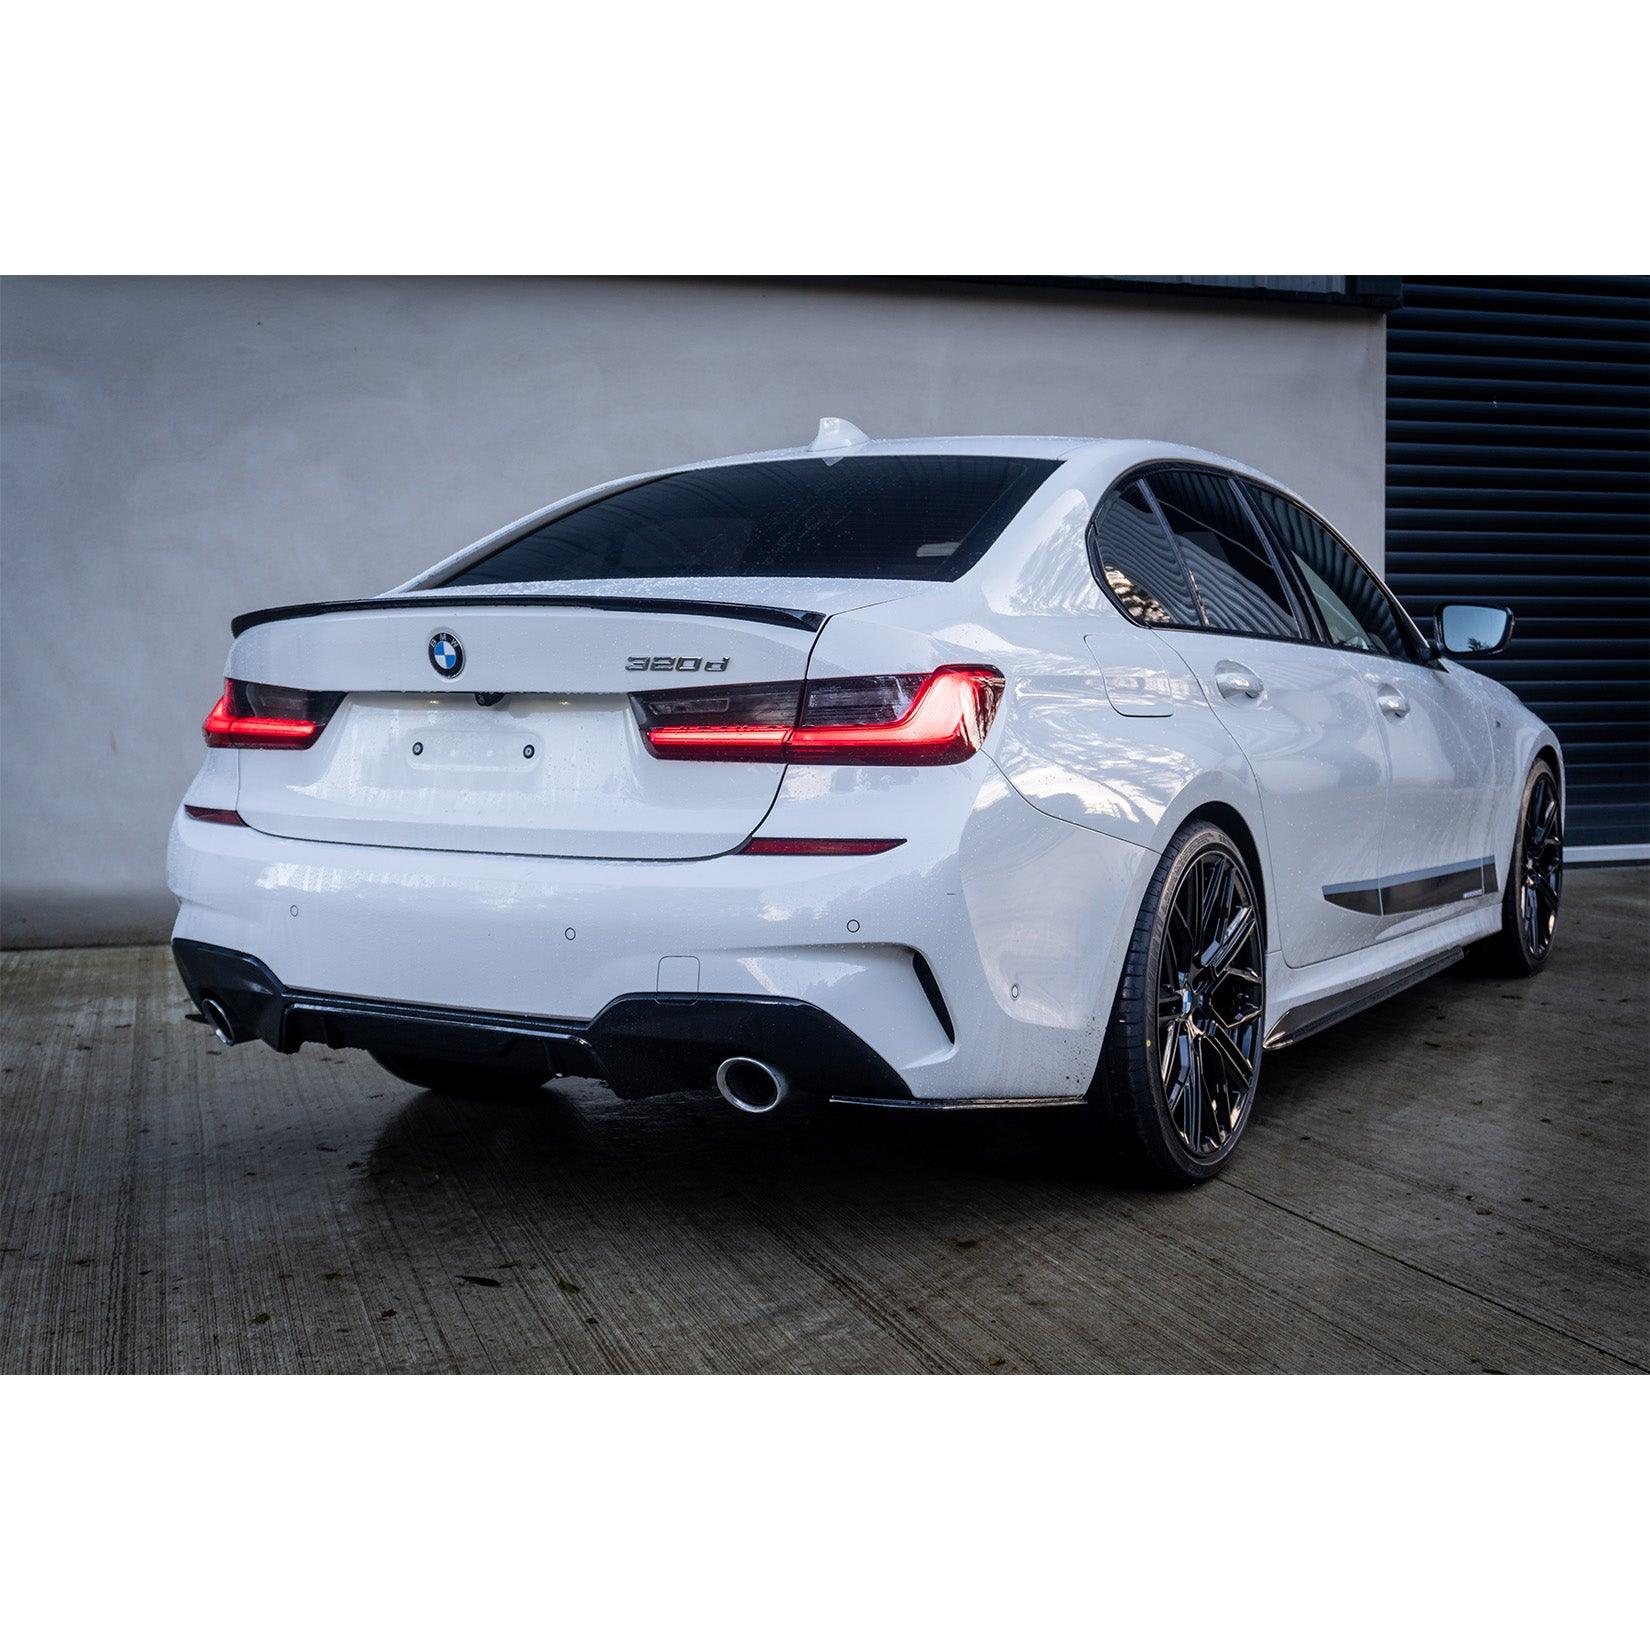 BMW 3 SERIES G20/G28 2018 ON REAR SPATS EXTENSTIONS FOR M SPORT BUMPER IN GLOSS BLACK - RisperStyling